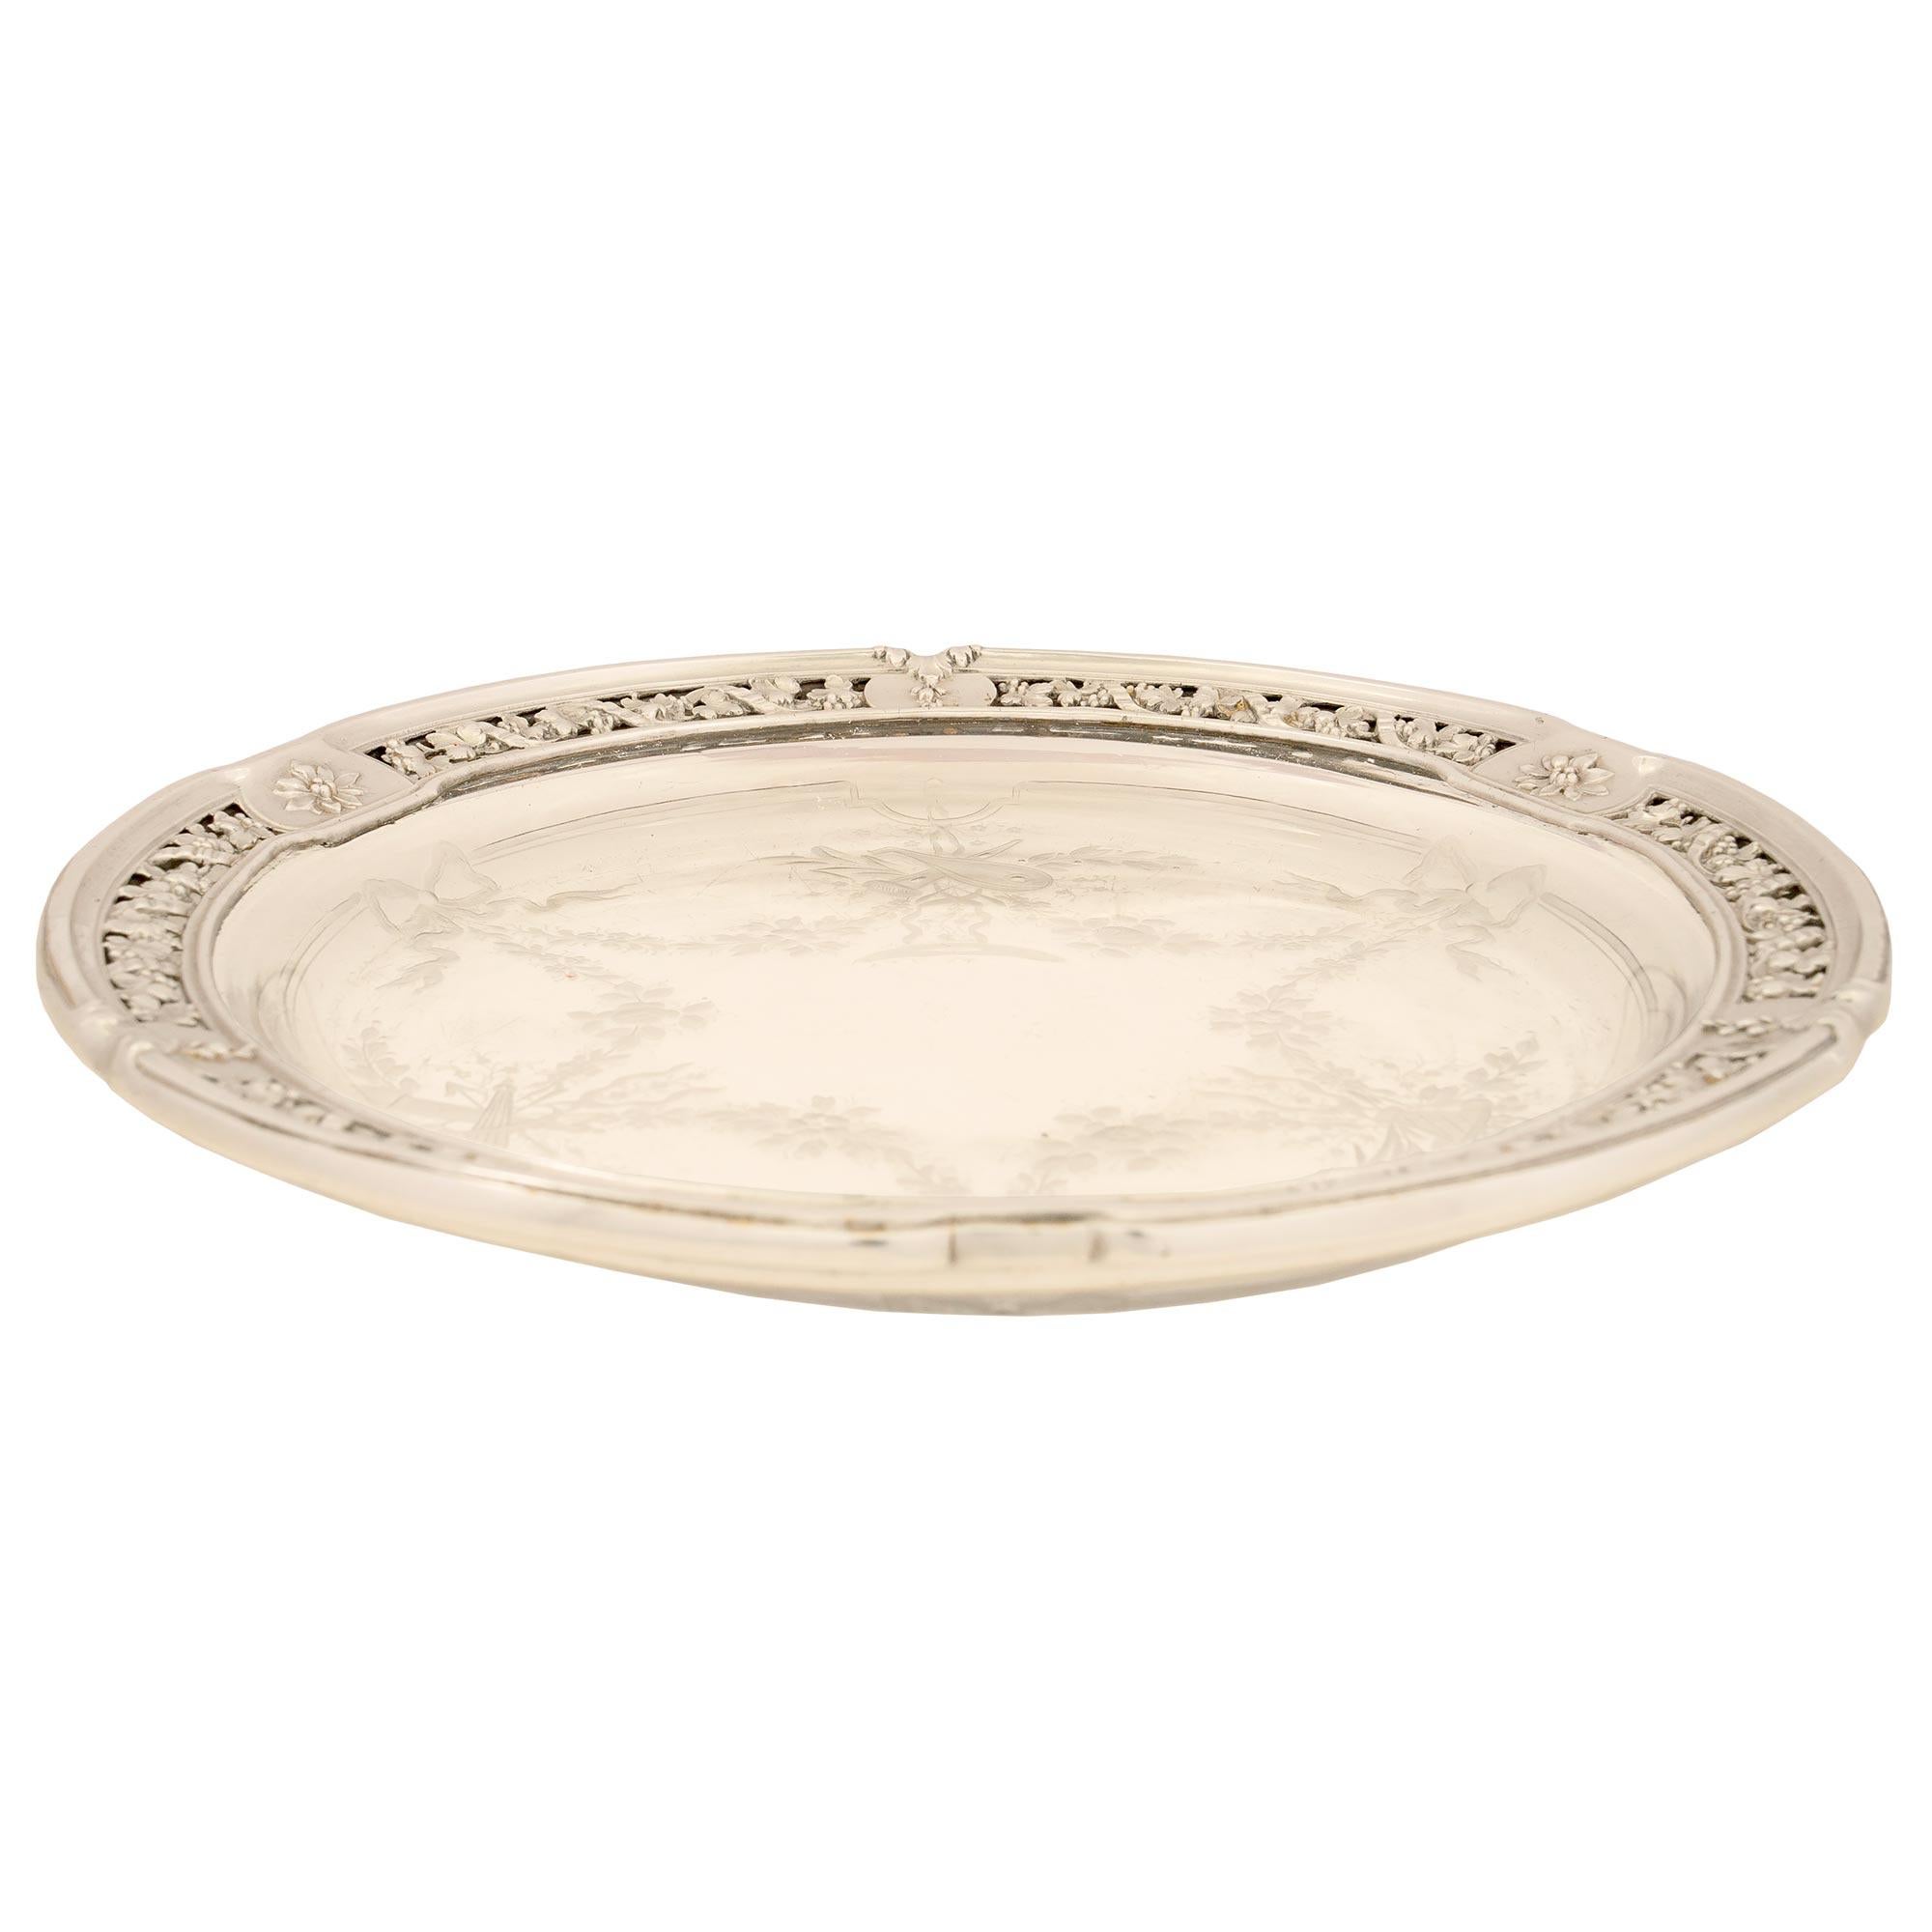 An elegant French 19th century Louis XVI st. etched crystal and silver plated decorative plate. The central dish is a lovely etched crystal with foliate and gardening designs. The crystal plate is framed within a pierced silver plated moulded border